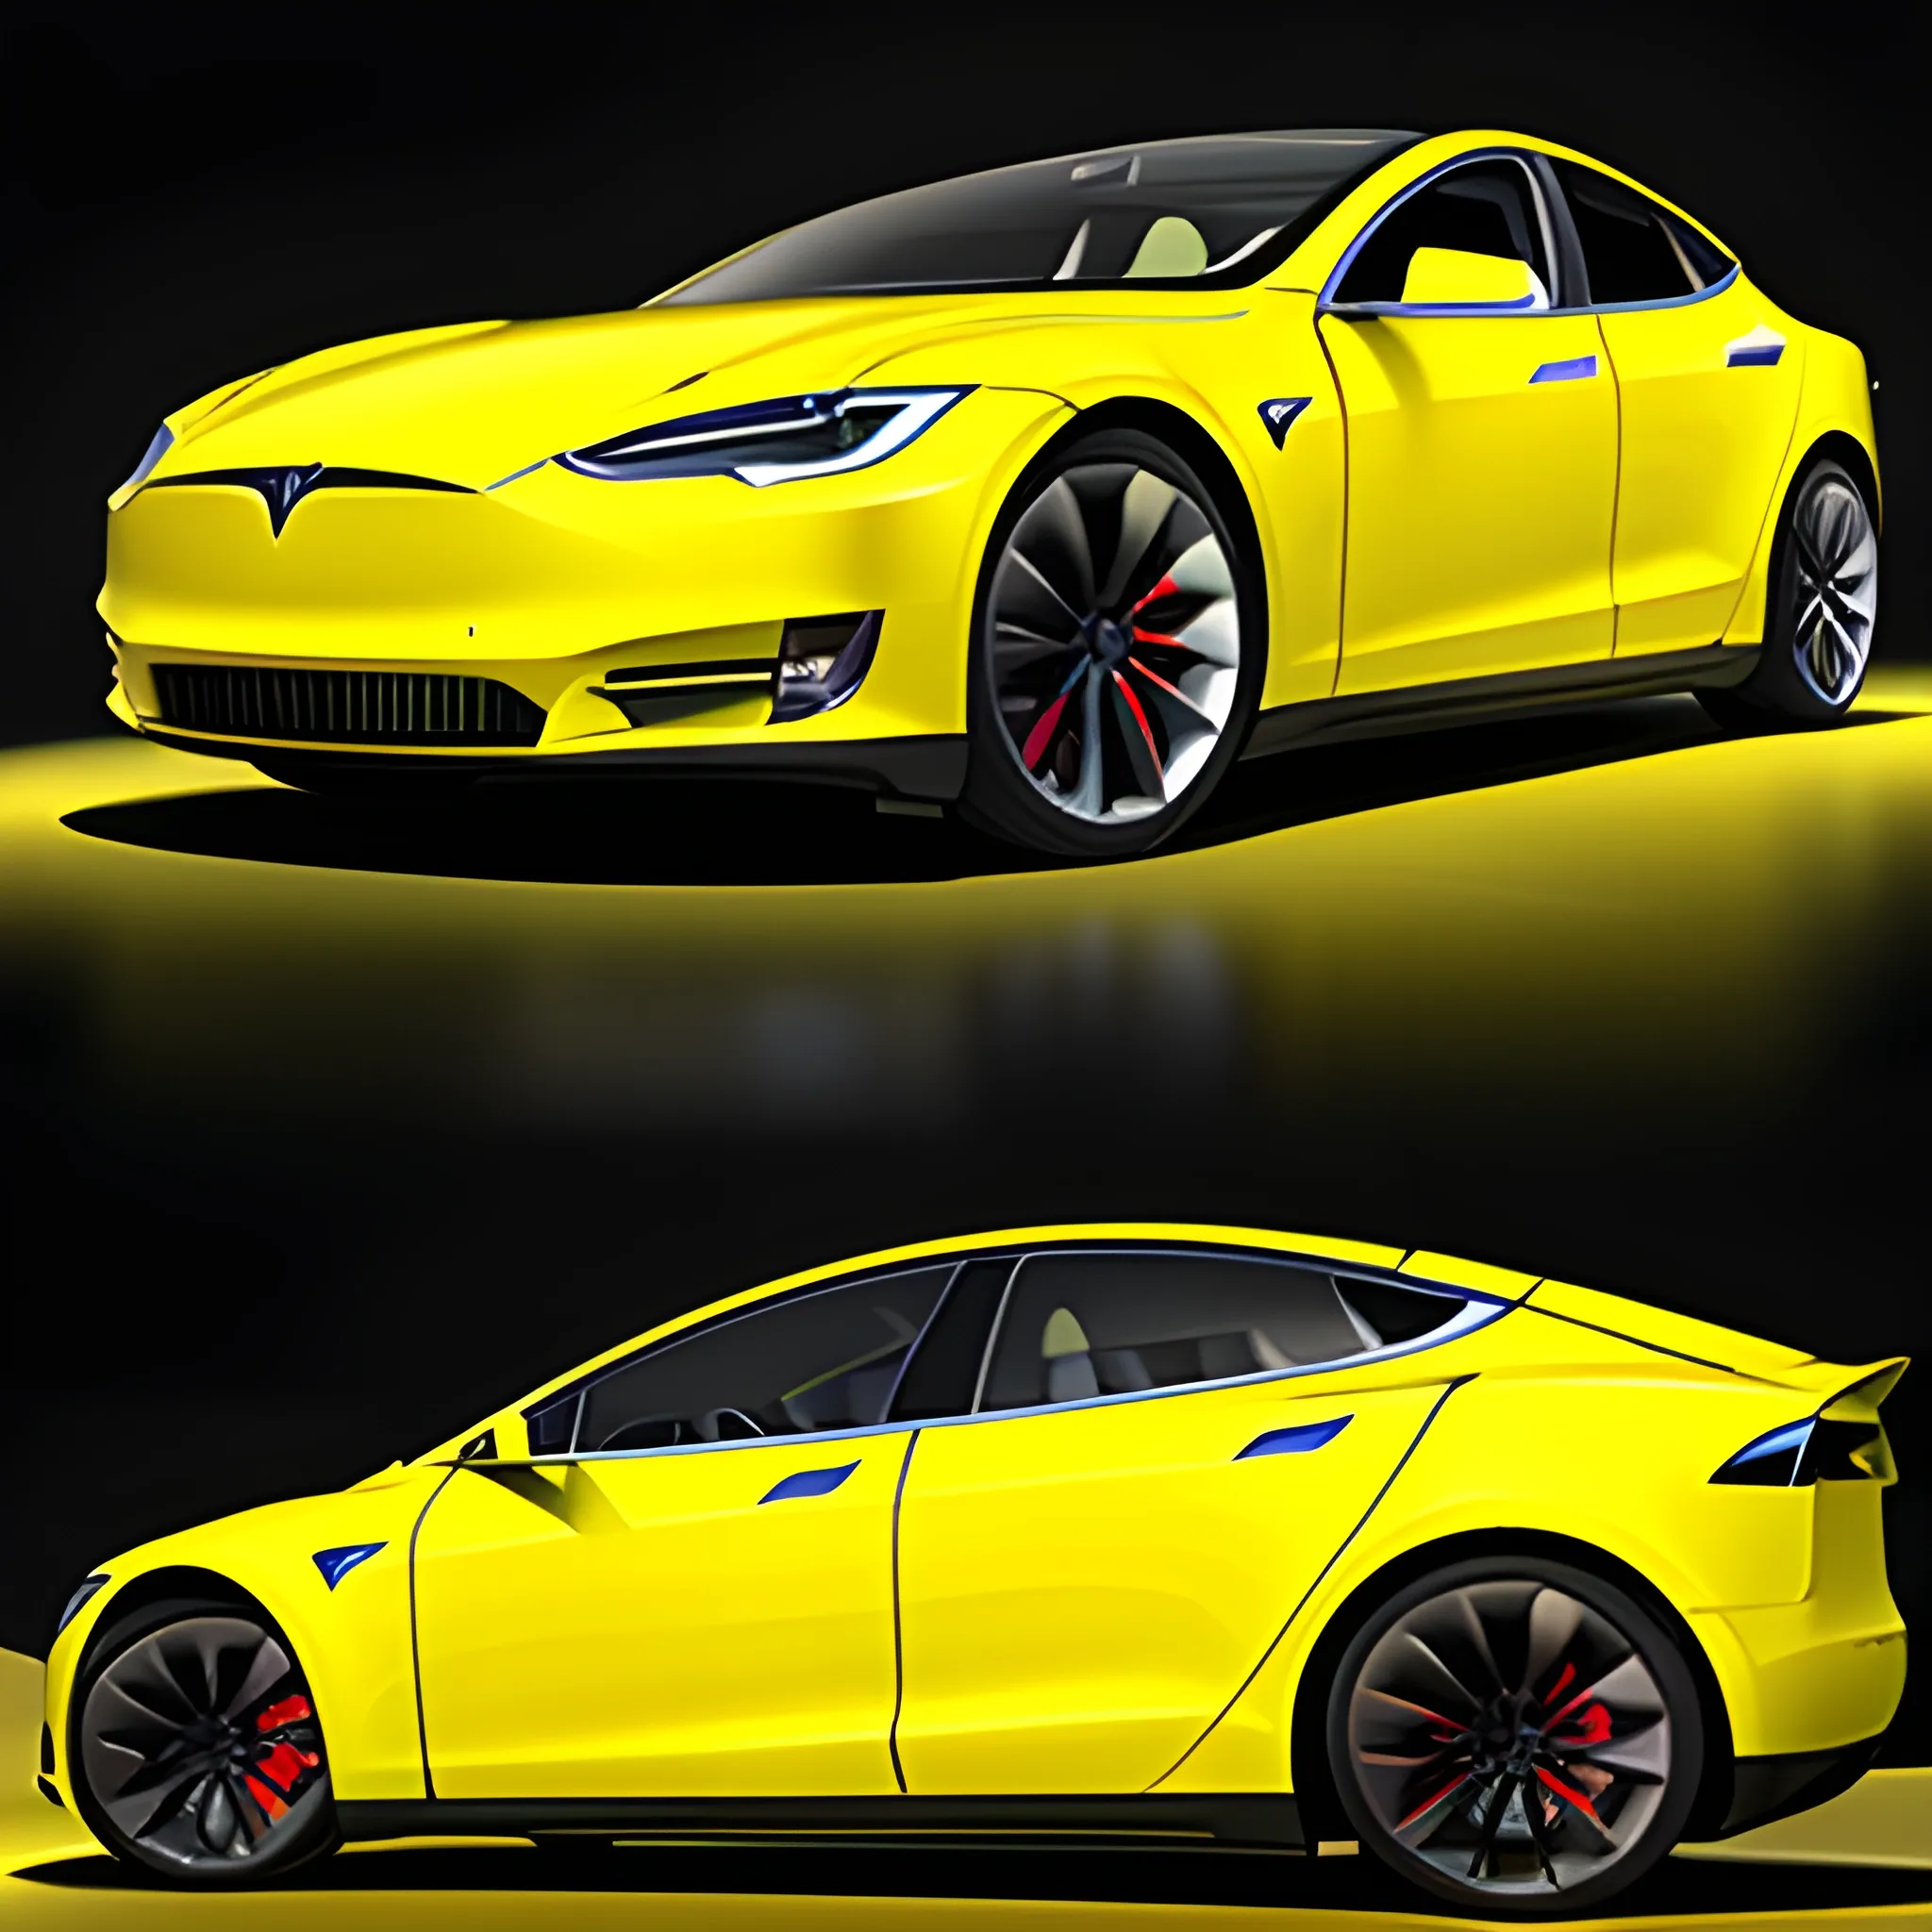 yellow tesla s with green plate wrote on plate TXAA-434 from front view budapest
, 3D, 3D